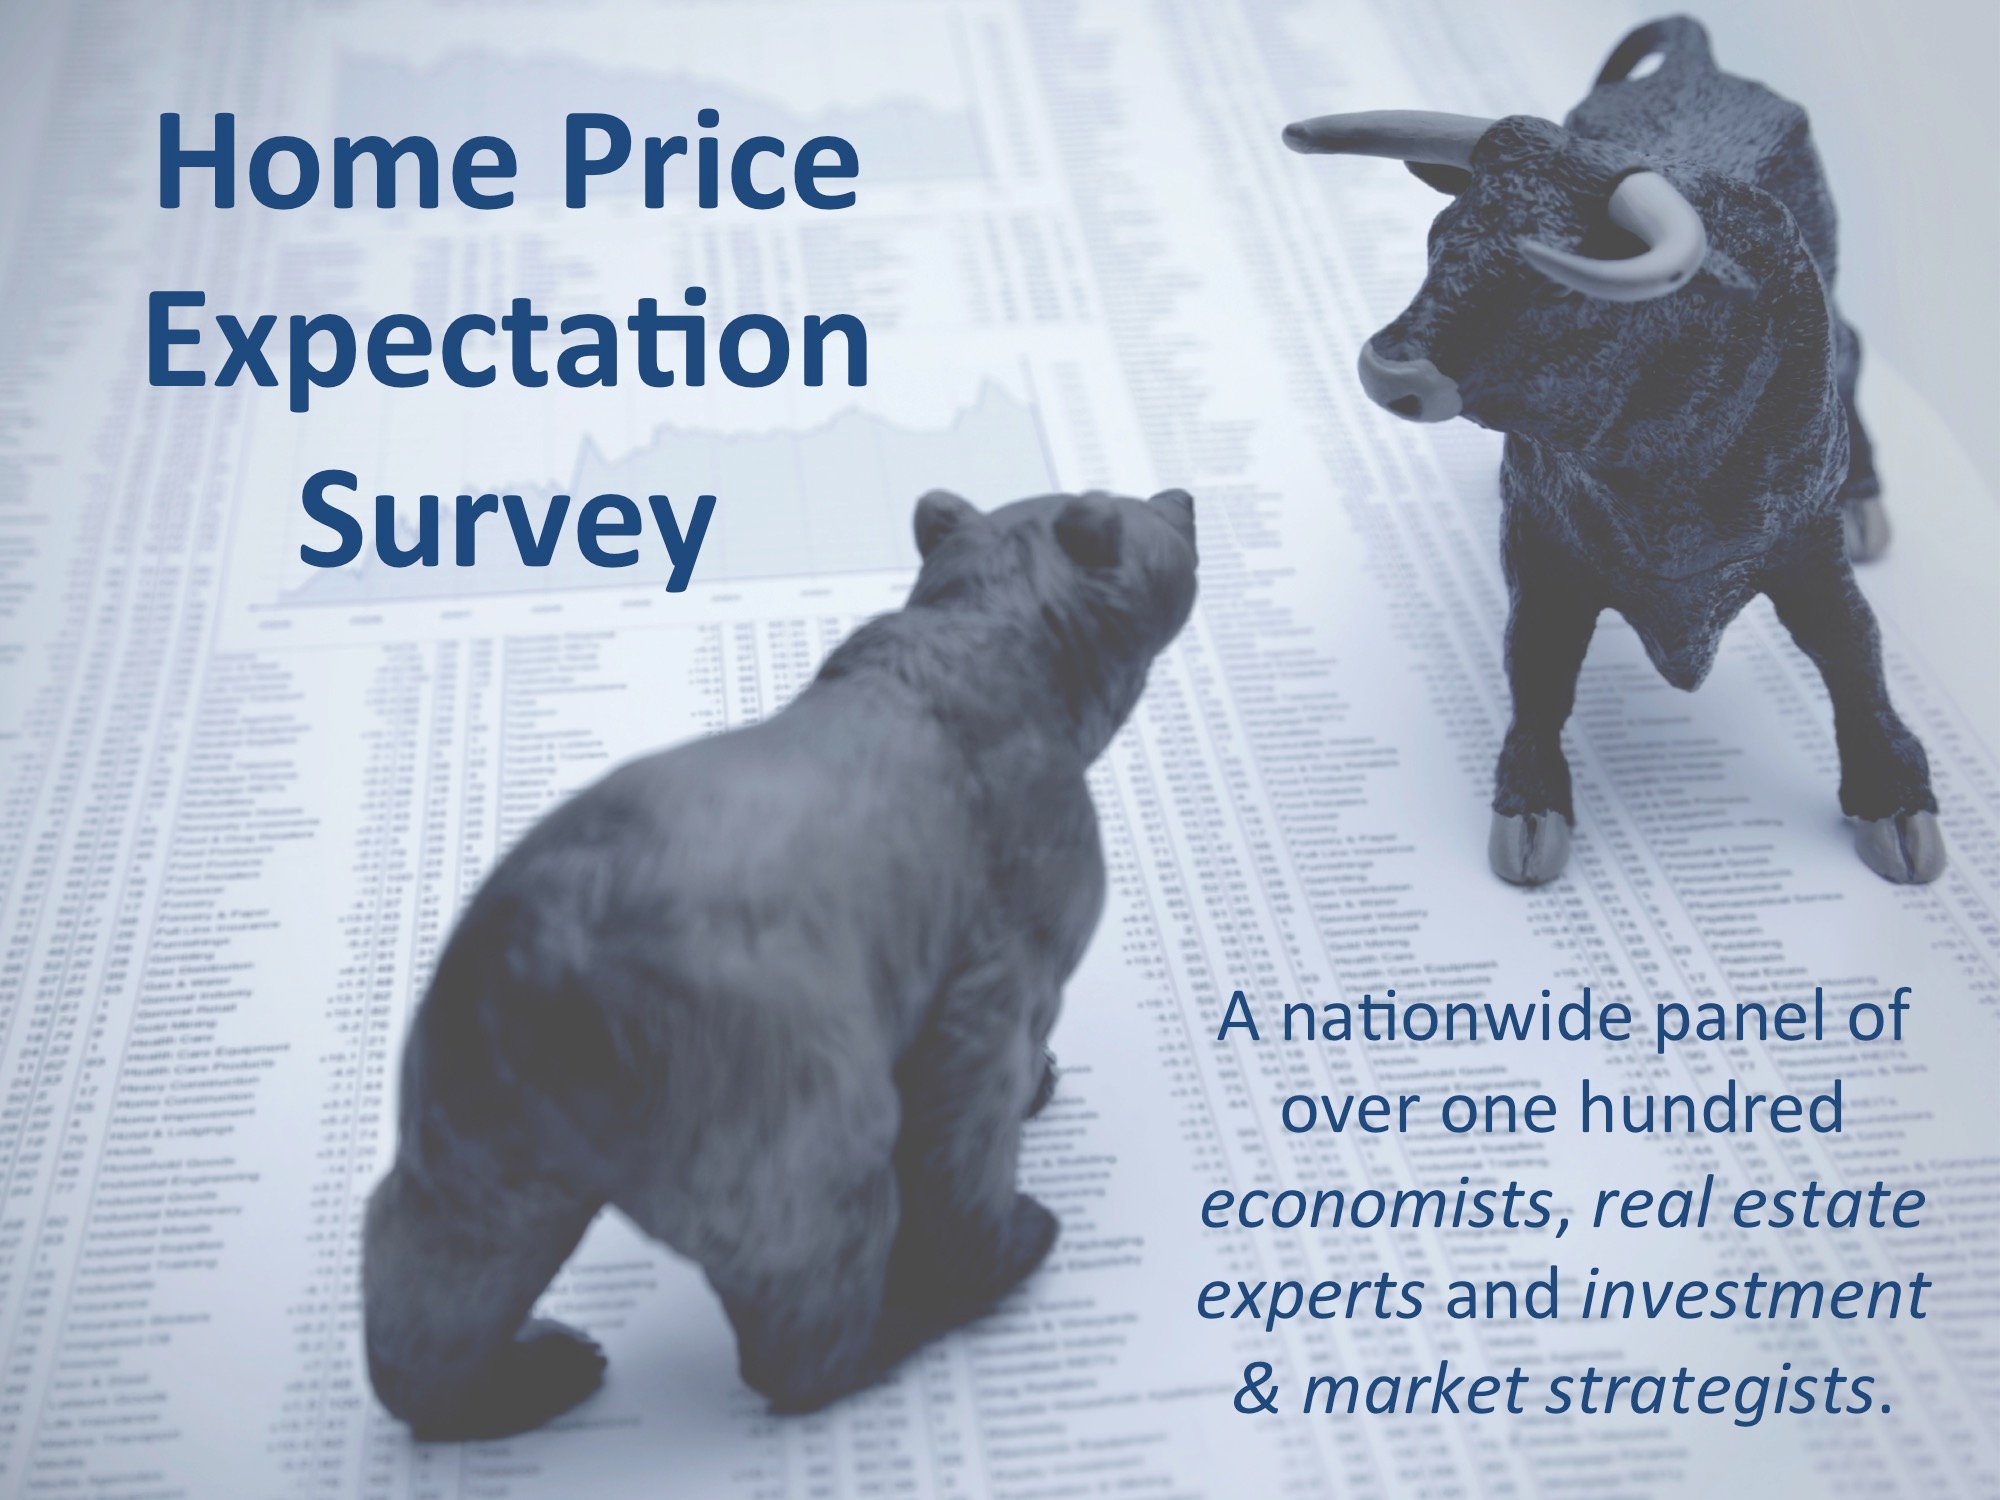 Home Price Expectation Survey Results Now Available!